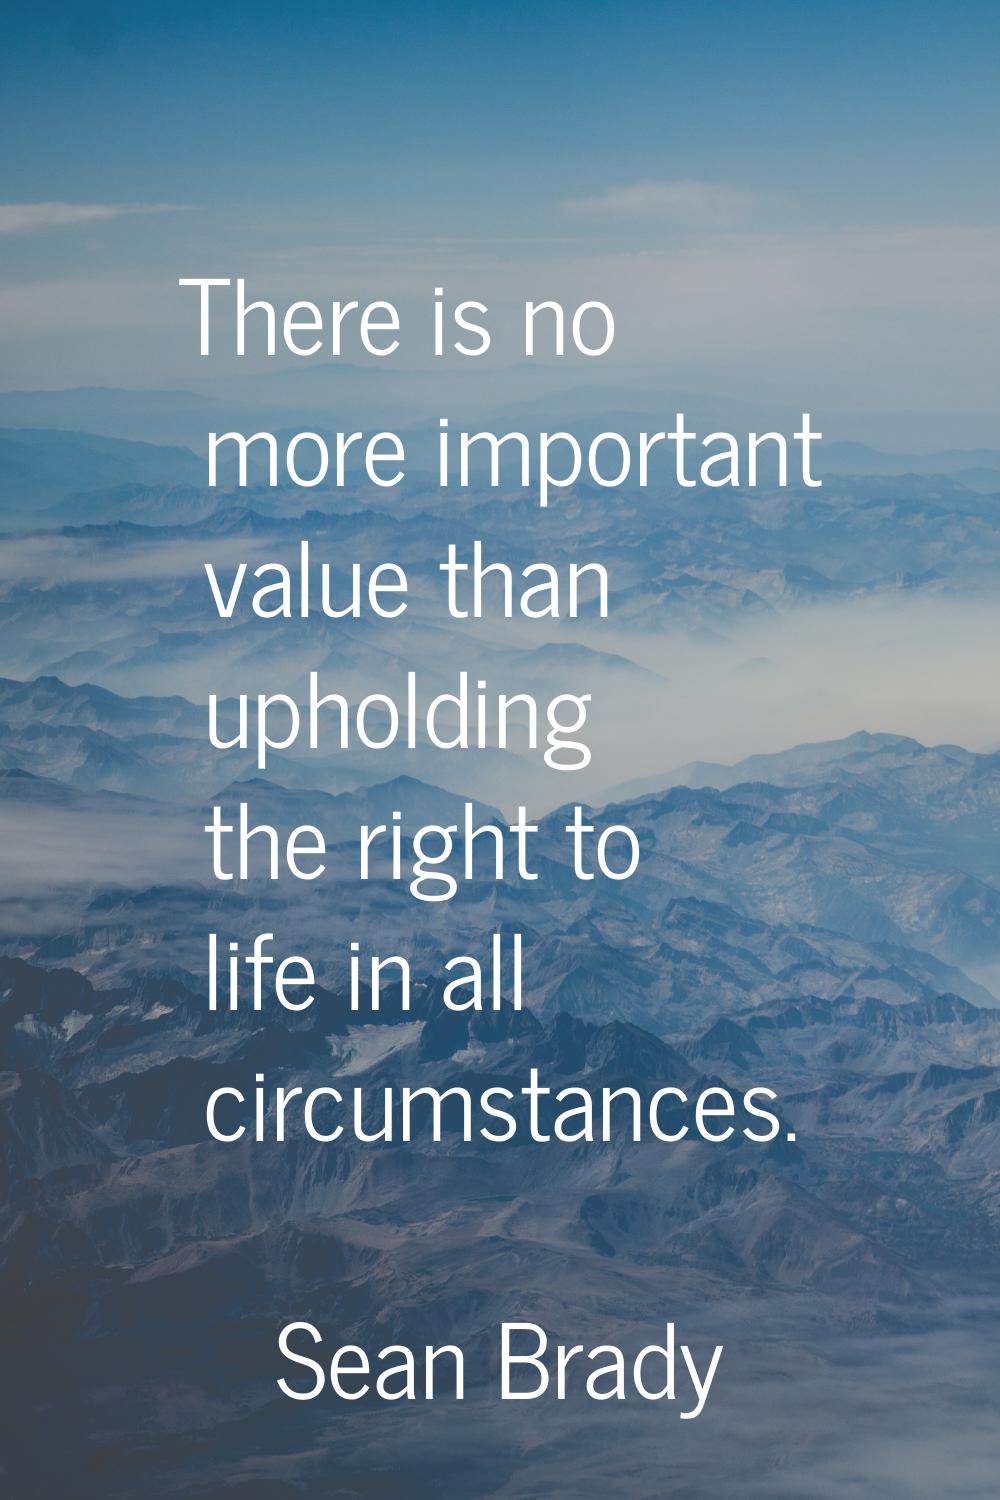 There is no more important value than upholding the right to life in all circumstances.